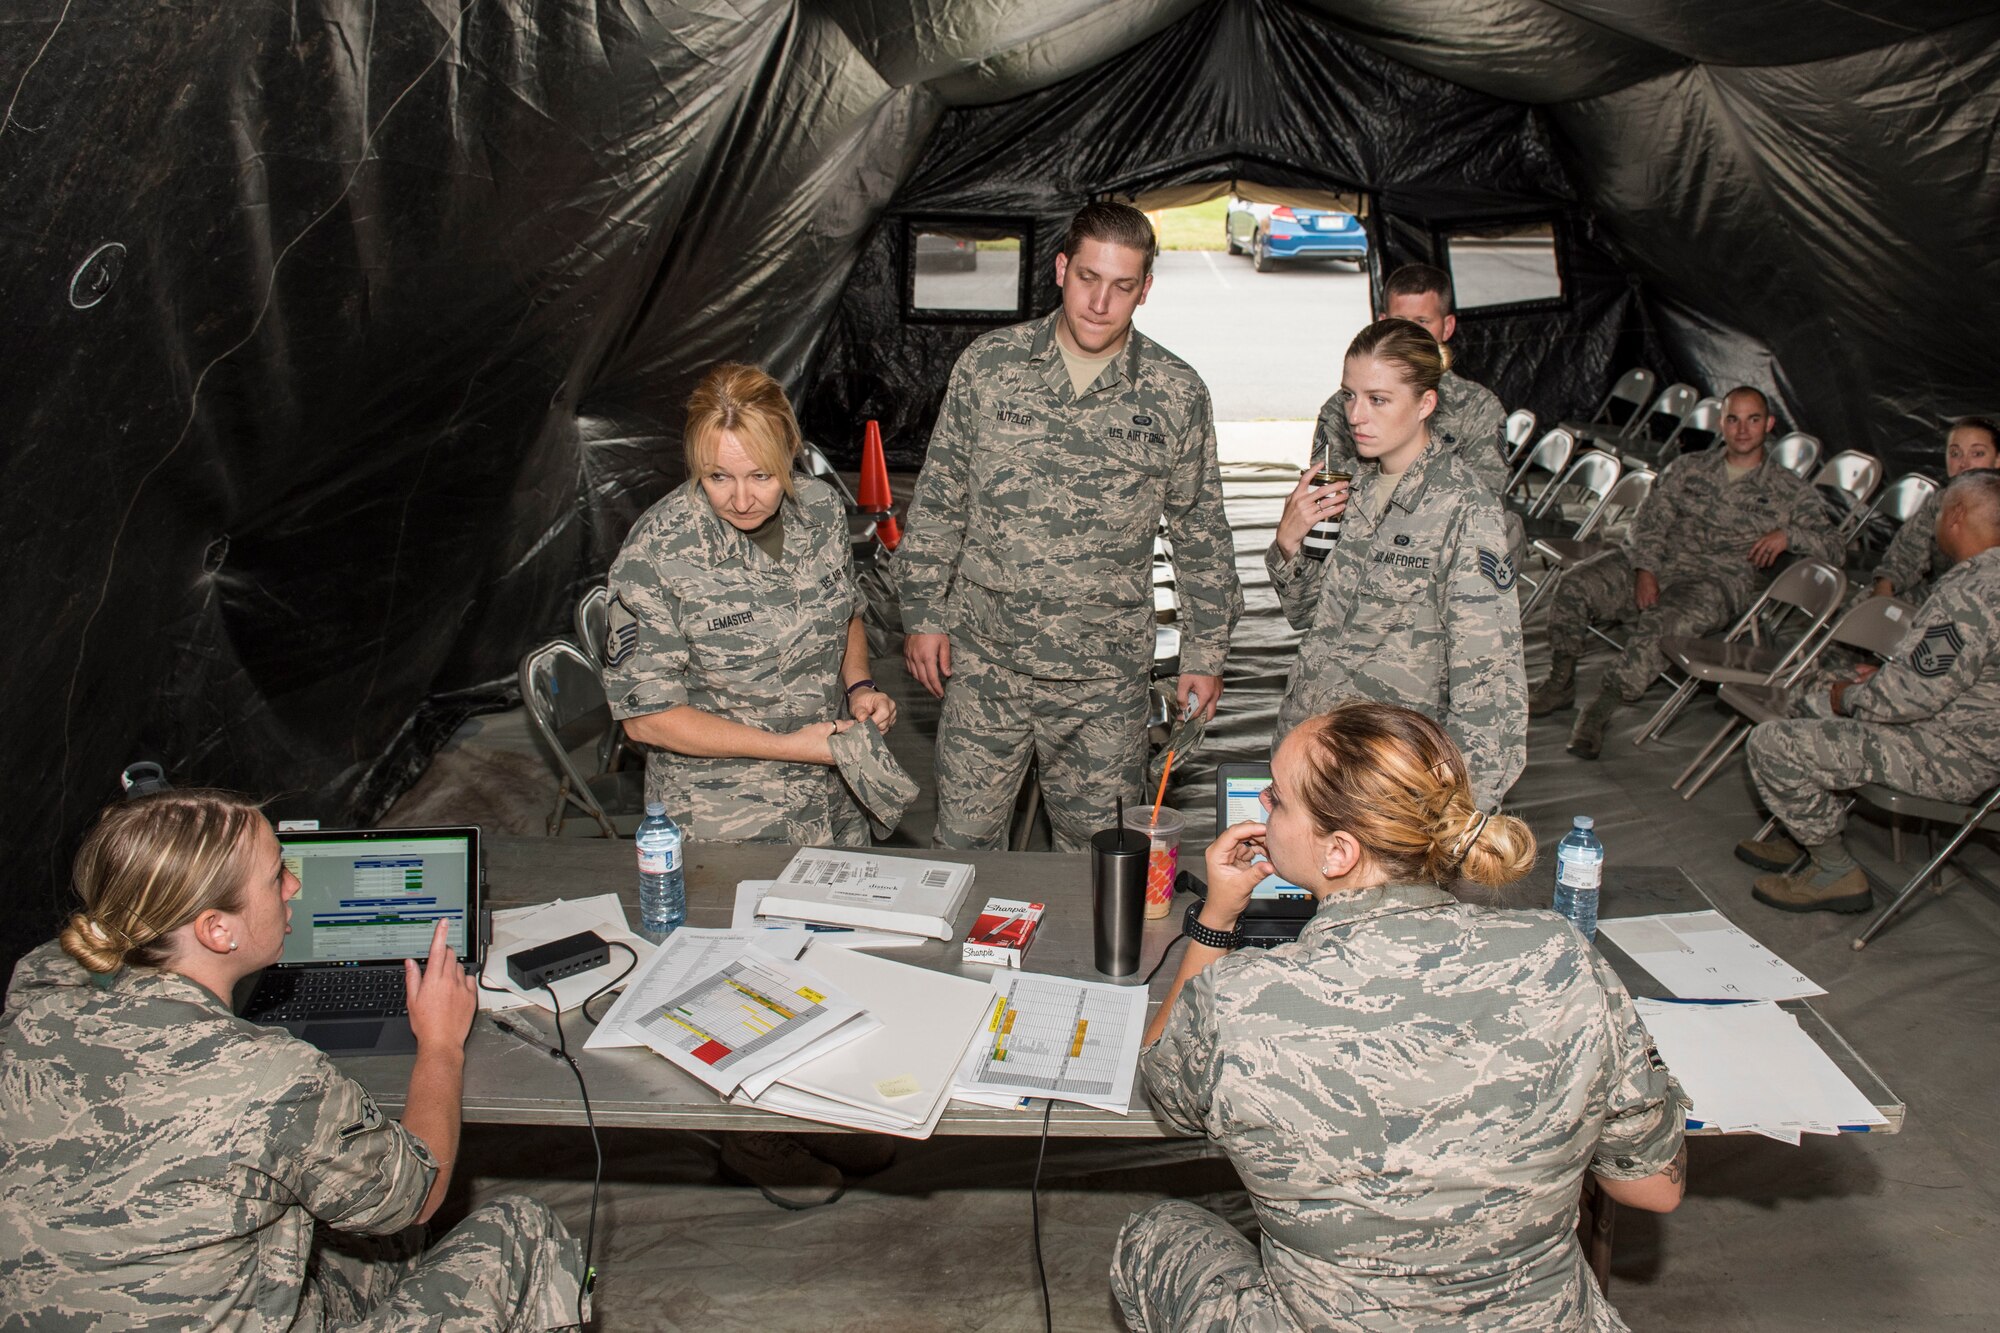 Airmen check in for their physical health assessment in a tent set up outside of the medical clinic as part of a new process tested by the 167th Medical Group, June 7, 2019. Check-in was moved outside to free space inside the building allowing more space to be used for exams and lab space. (U.S. Air National Guard photo by Tech. Sgt. Michael Dickson)